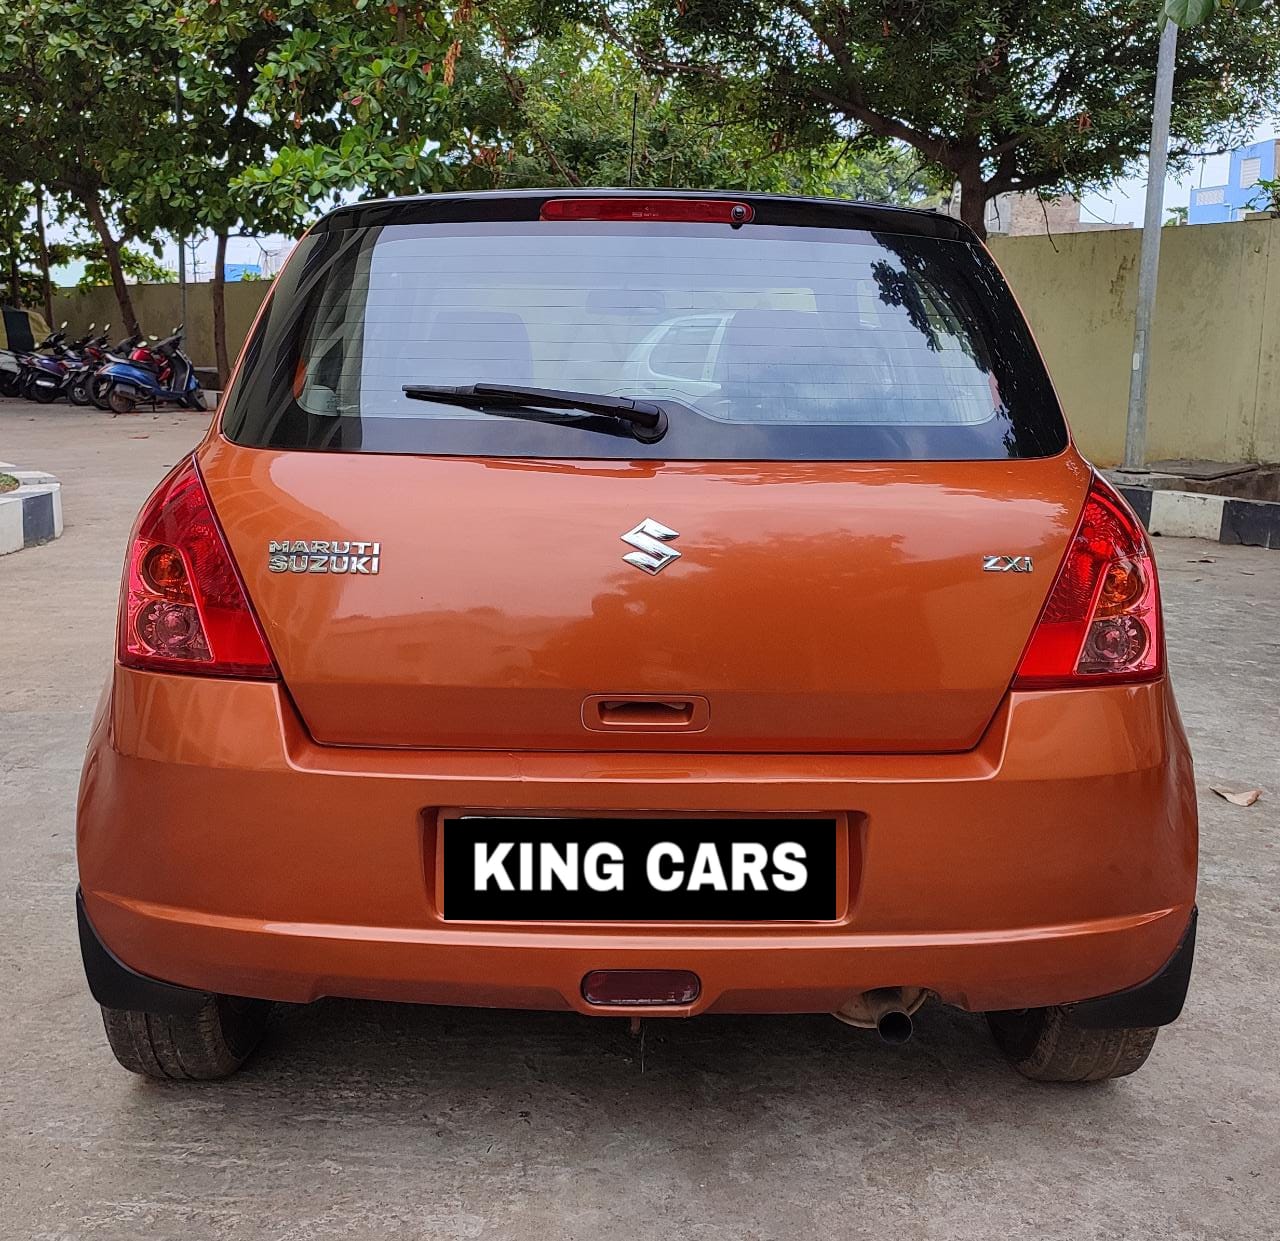 3742-for-sale-Maruthi-Suzuki-Swift-Petrol-Second-Owner-2006-PY-registered-rs-194999